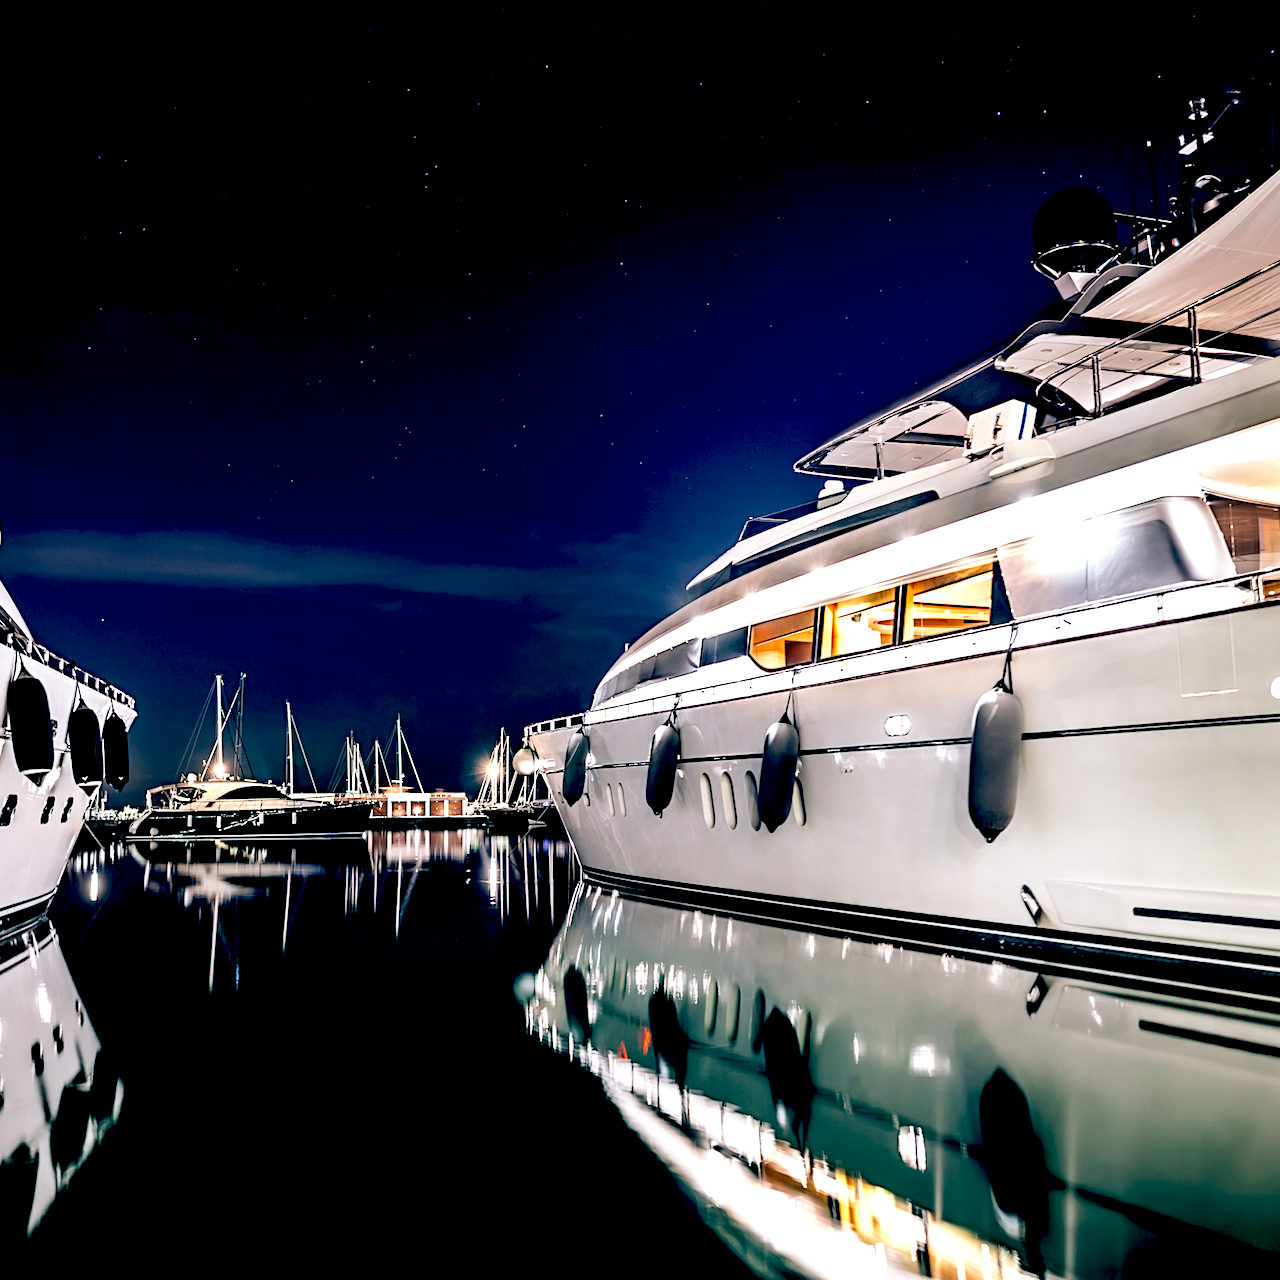 Luxury yachts in La Spezia harbor at night with reflection in water. Italy